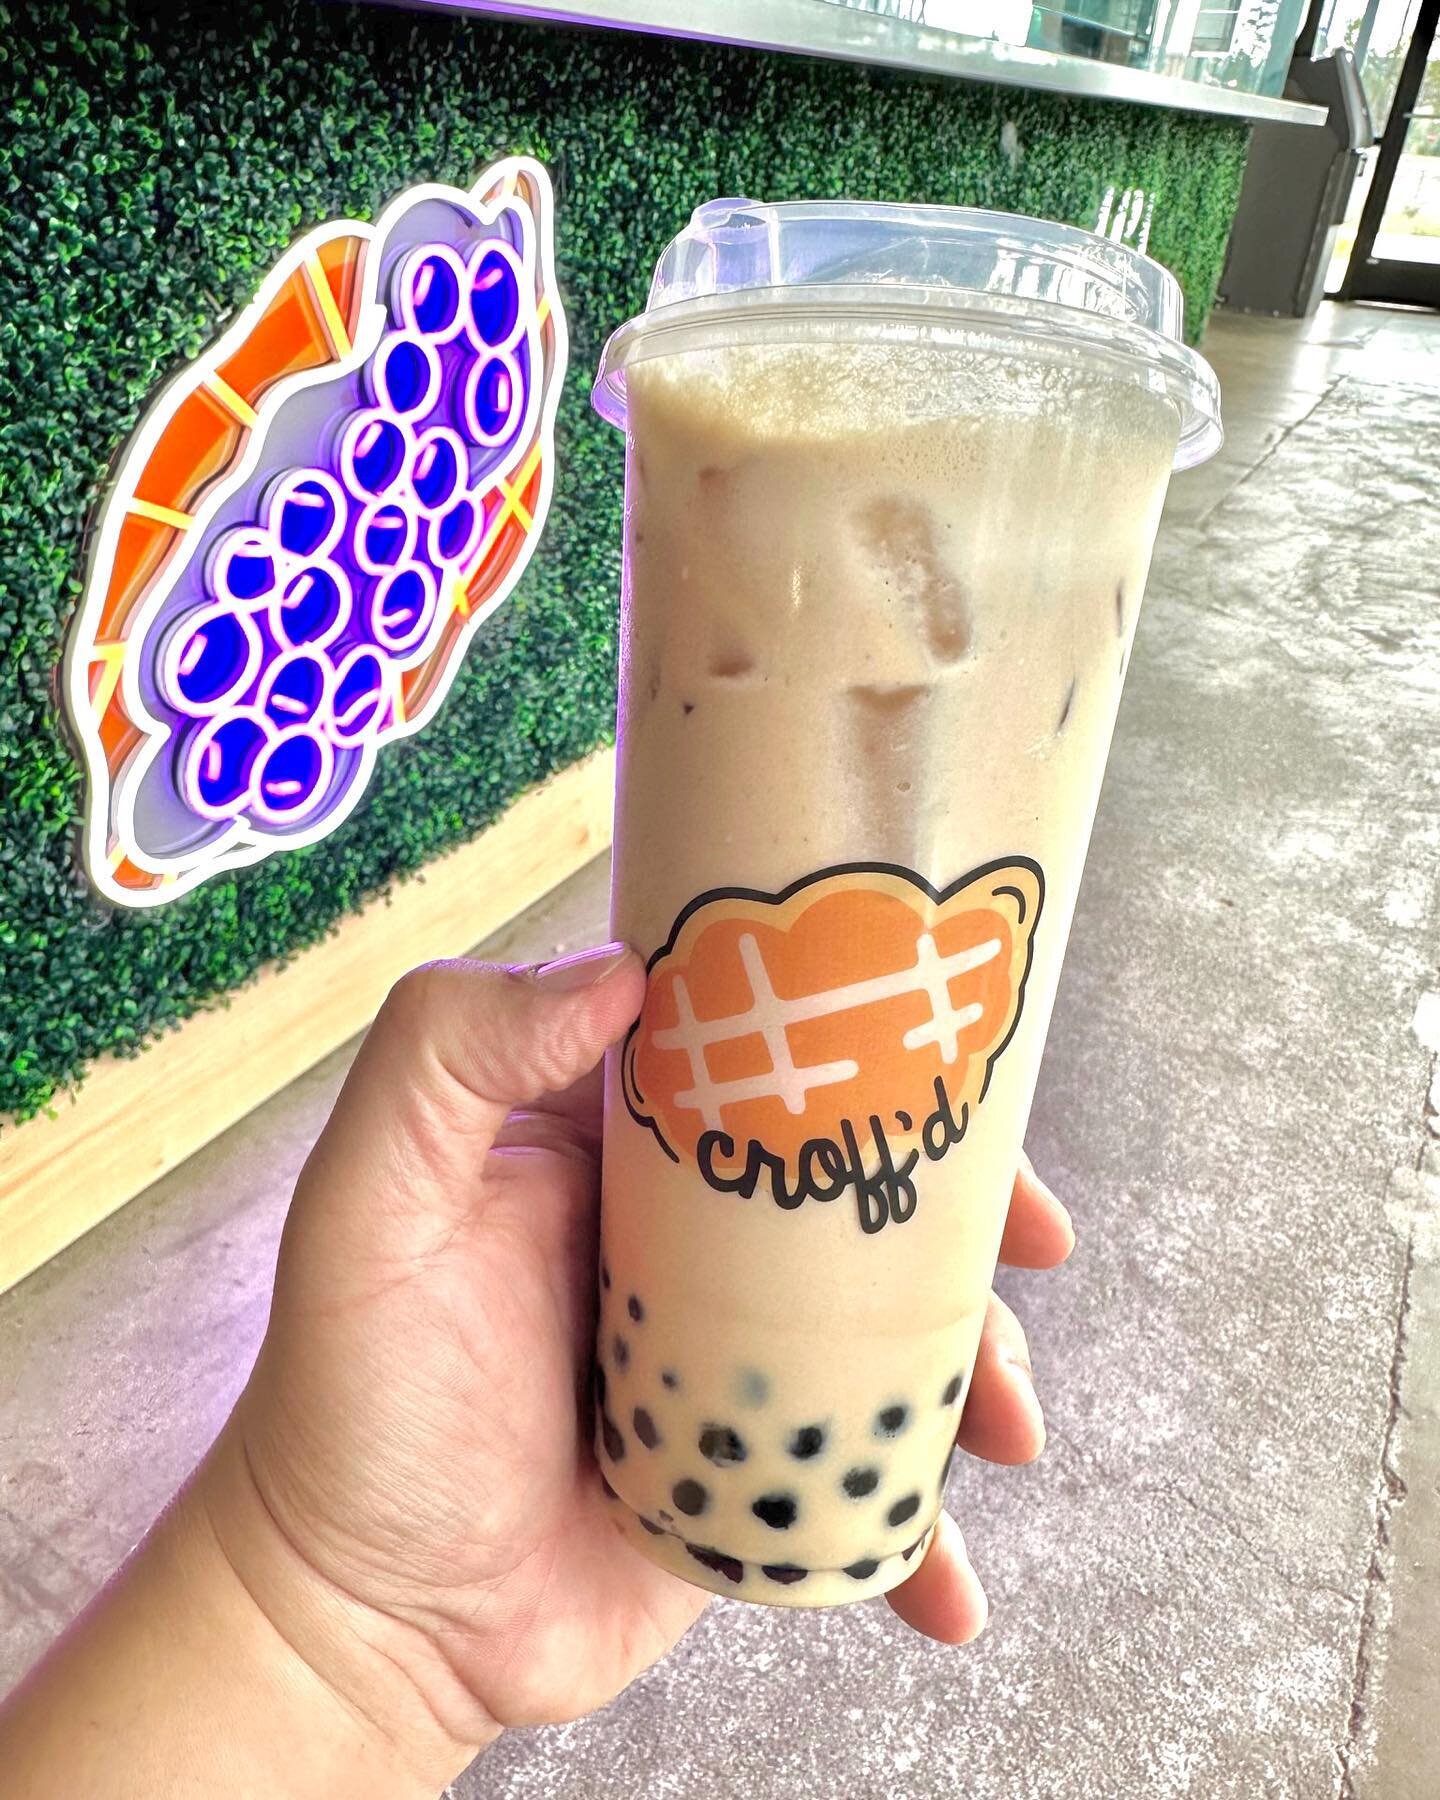 What could be better than walking around Railway Heights this weekend with your favorite people? Walking around Railways Heights with your favorite people and BOBA 🤩🧋

⏰ Hours:
Thurs 12-8PM
Fri- Sat 12-9PM
Sun 12-8PM
📍Inside @railwayheightsmarket 